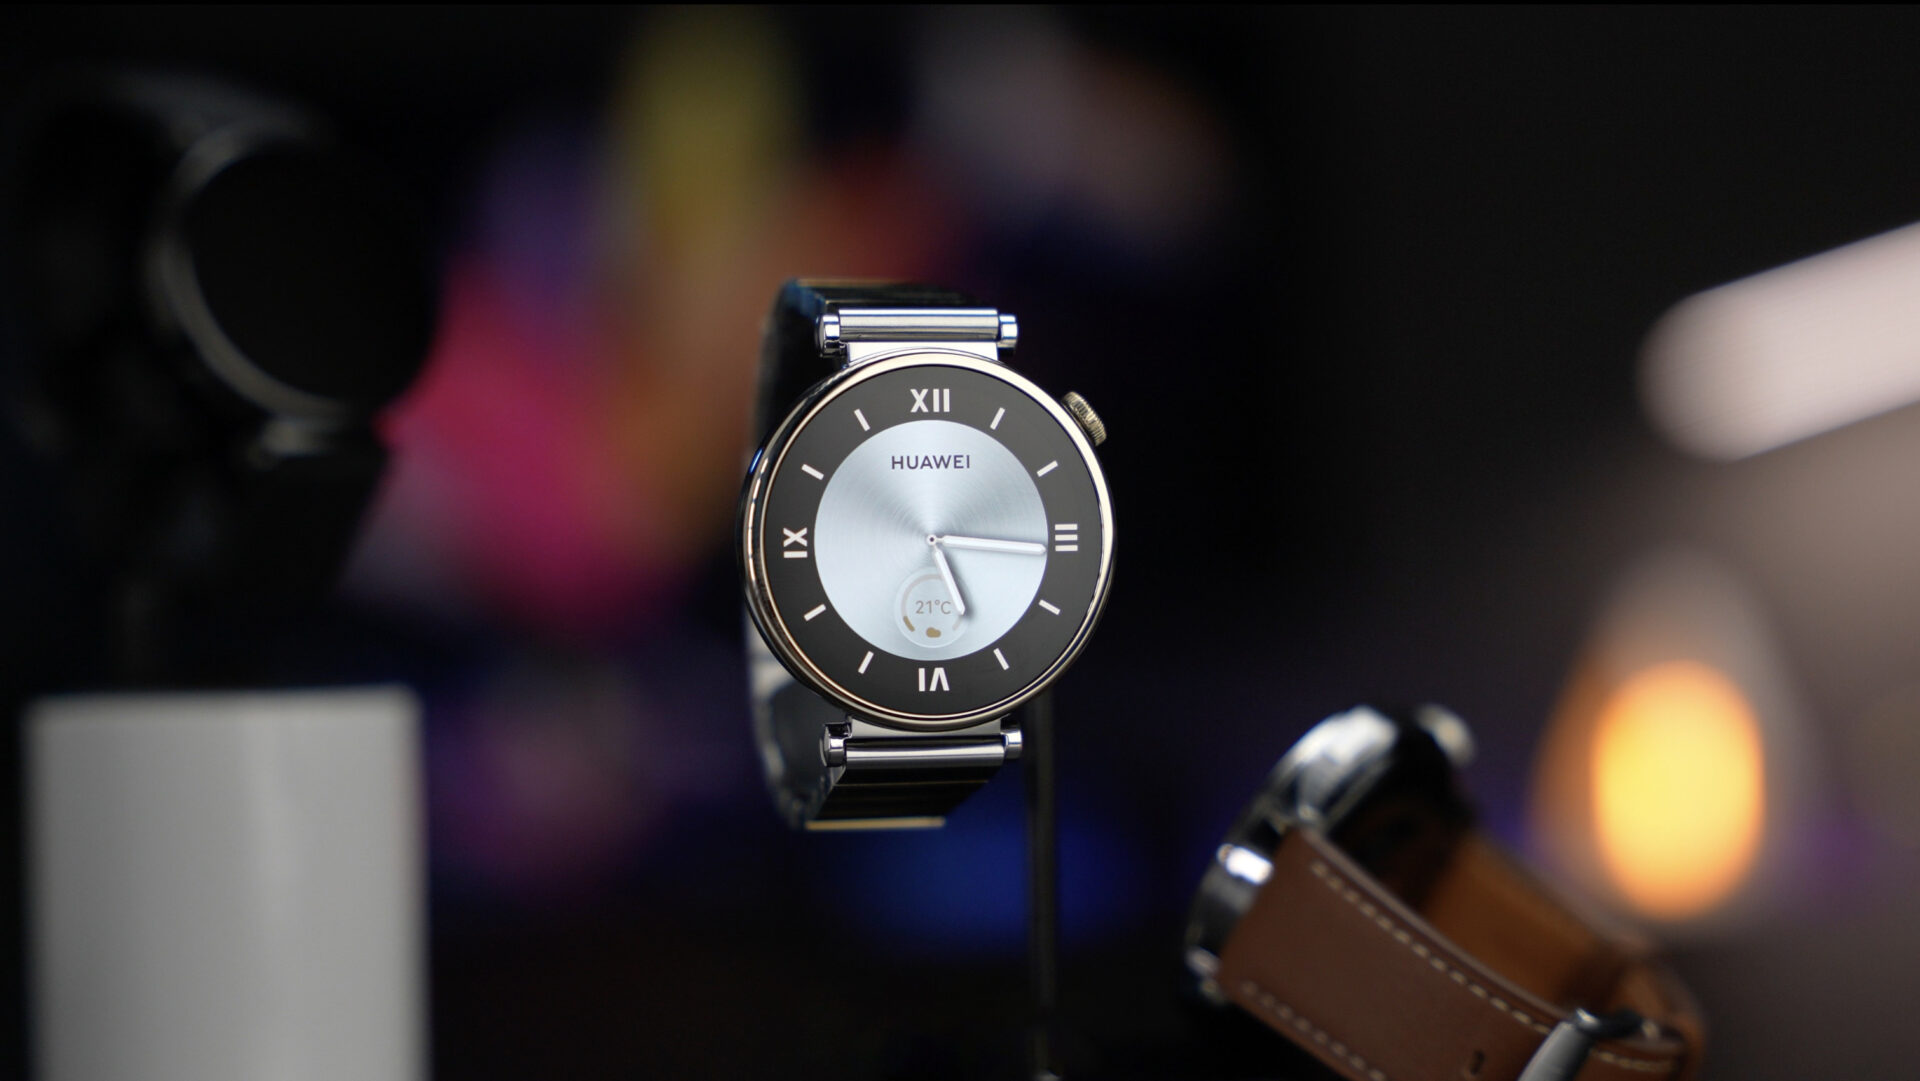 Huawei Watch GT4 With AMOLED Display - Unboxing,Specs 